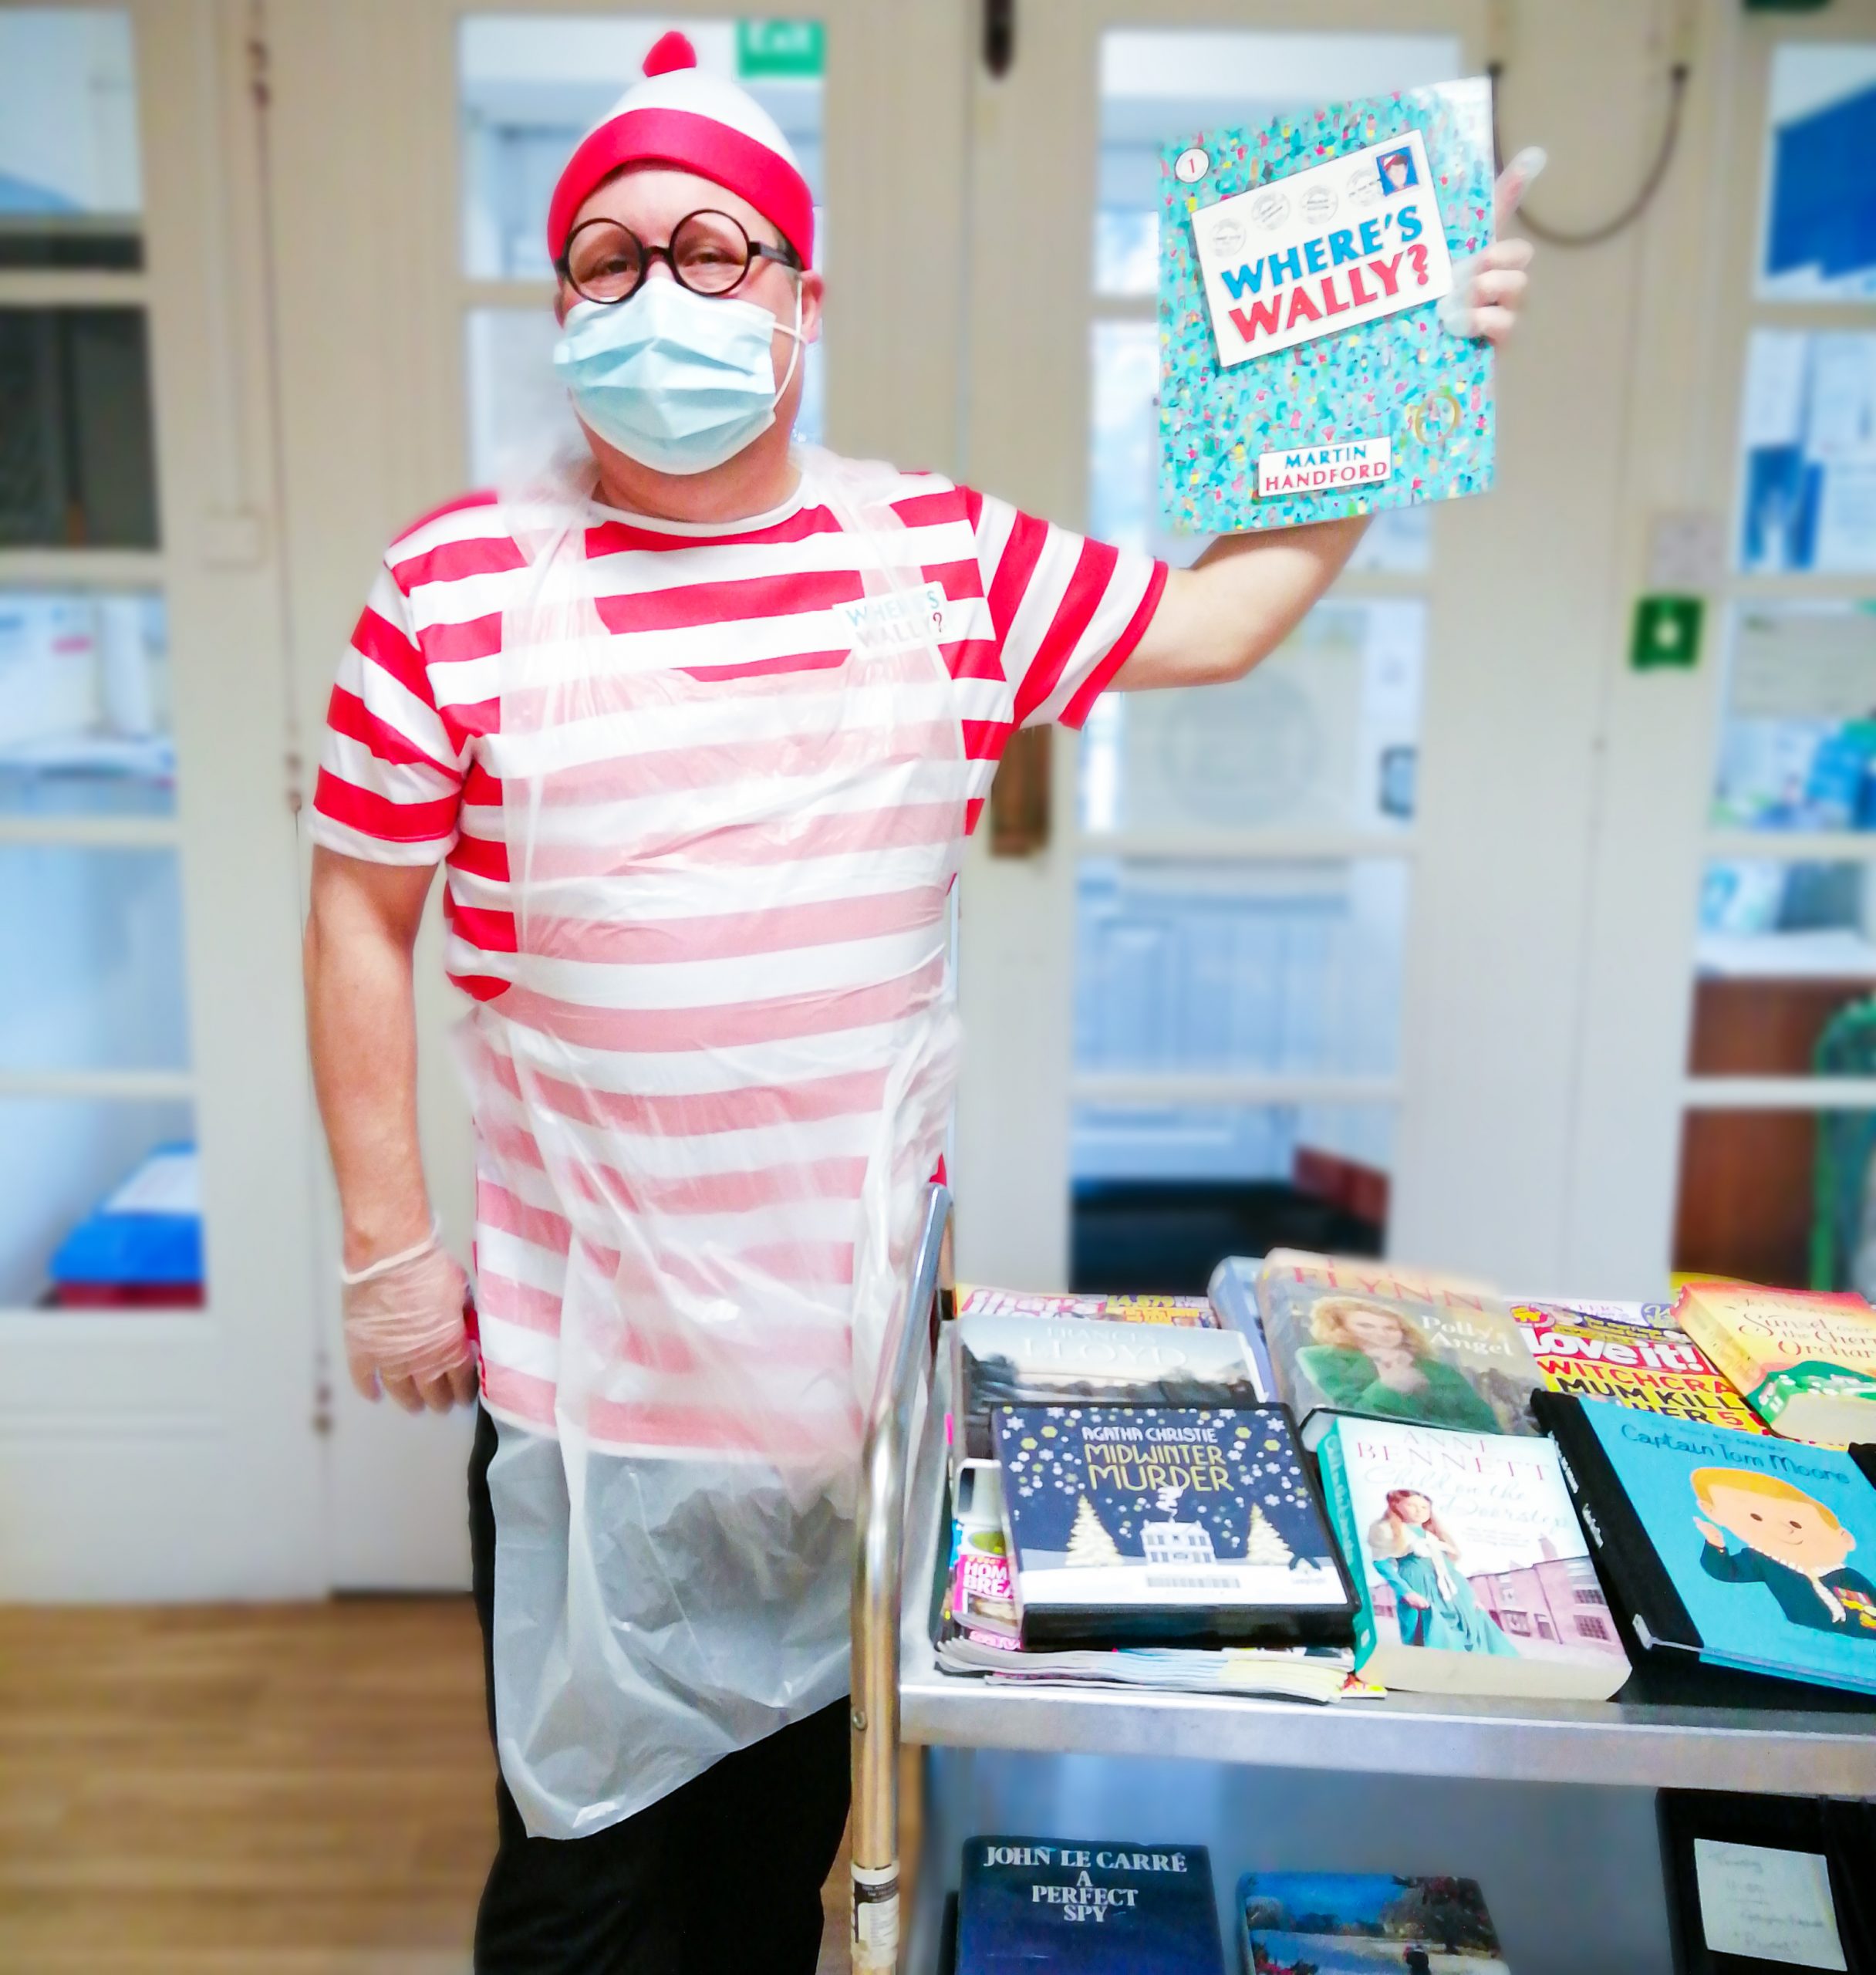 Rob Paton dressed as Wally for World Book Day. Rob was nominated for an award for the activities he provides for residents at the home.